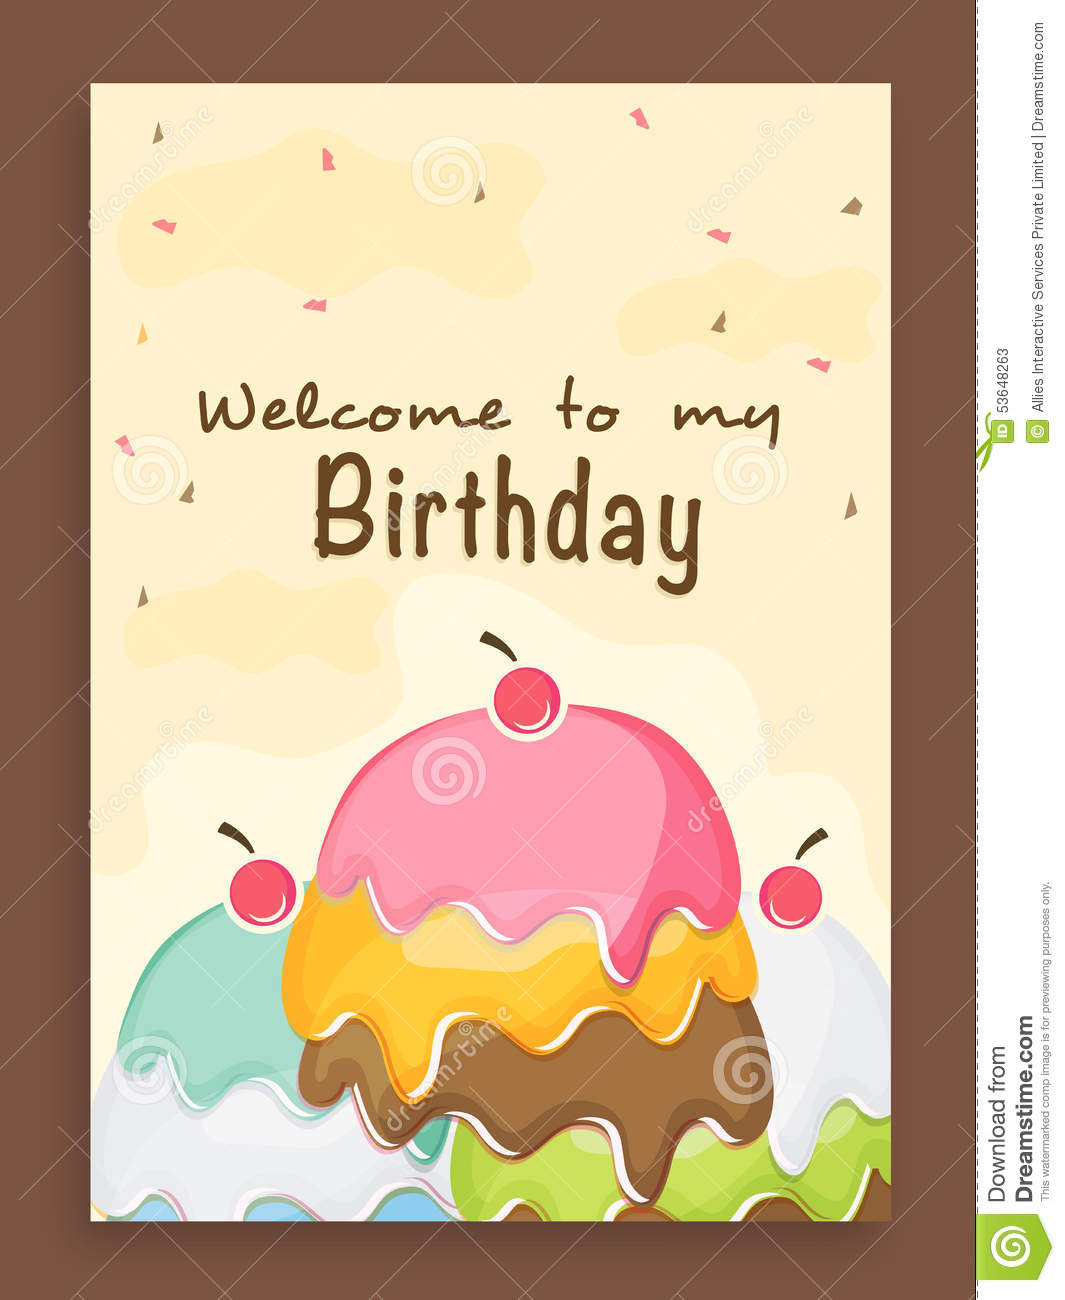 Best ideas about Birthday Party Card
. Save or Pin Invitation Card Design For Birthday Party Stock Image Now.